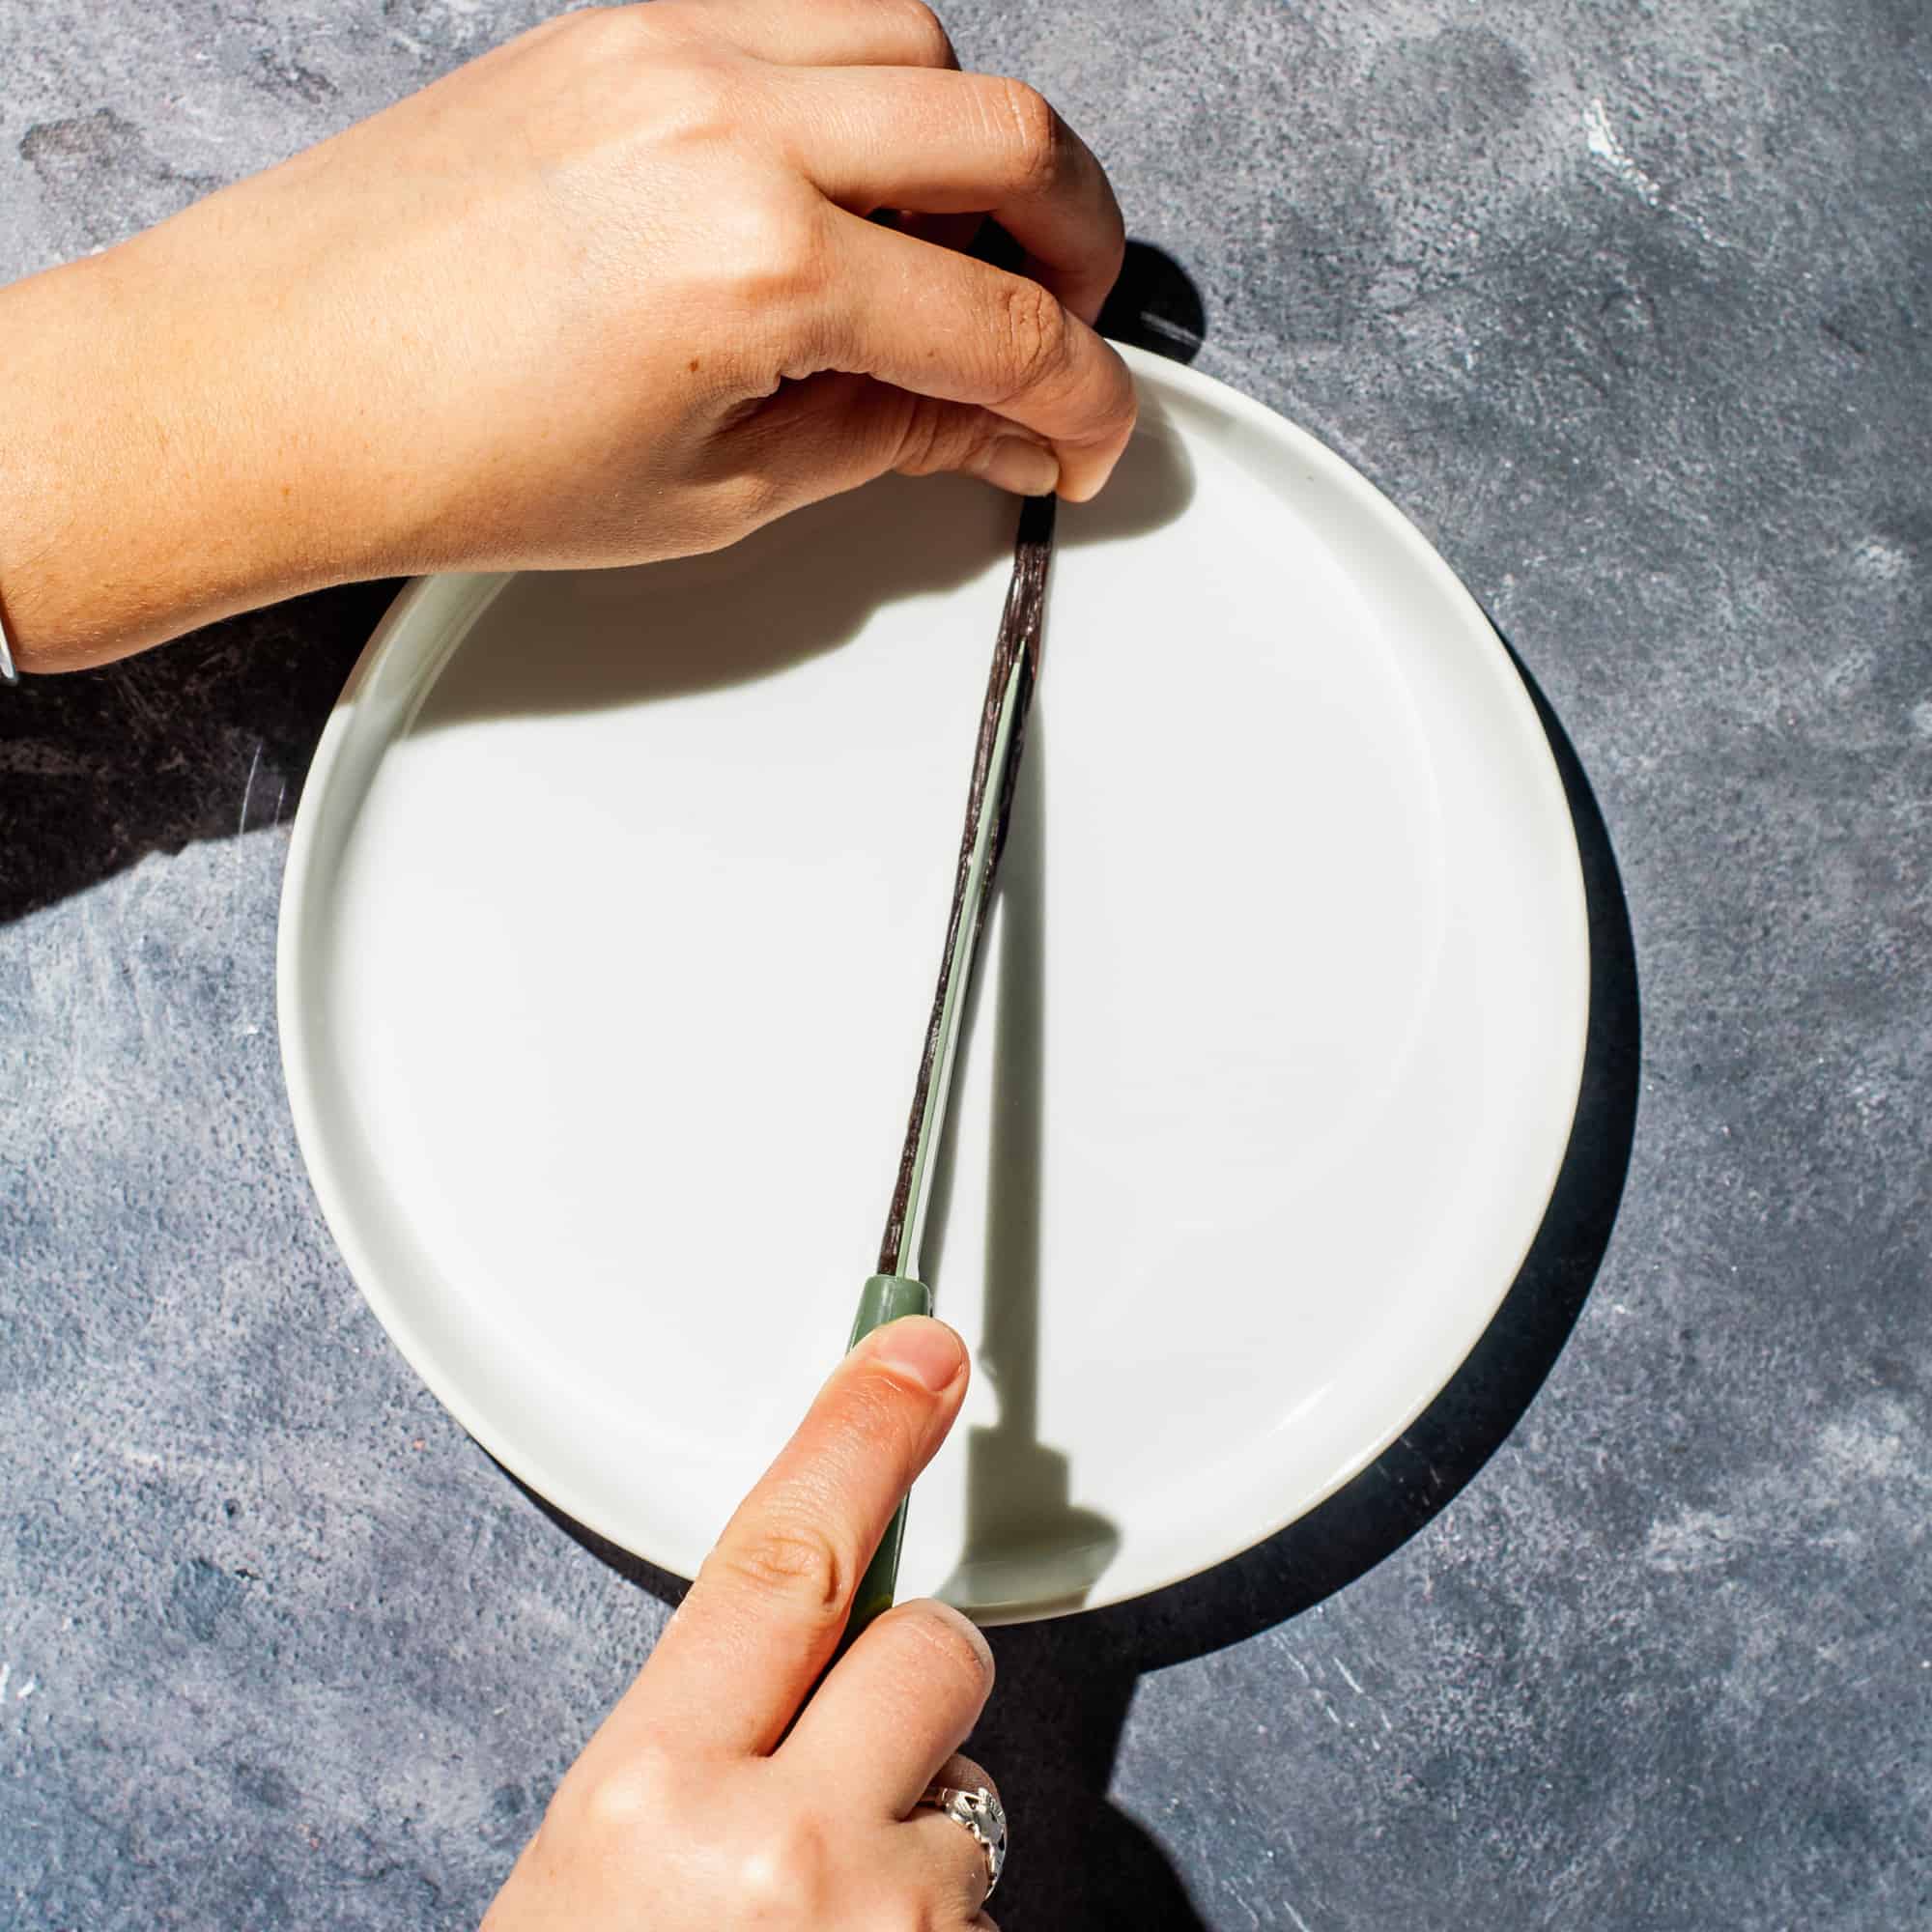 slicing a vanilla bean in half lengthwise on a white plate